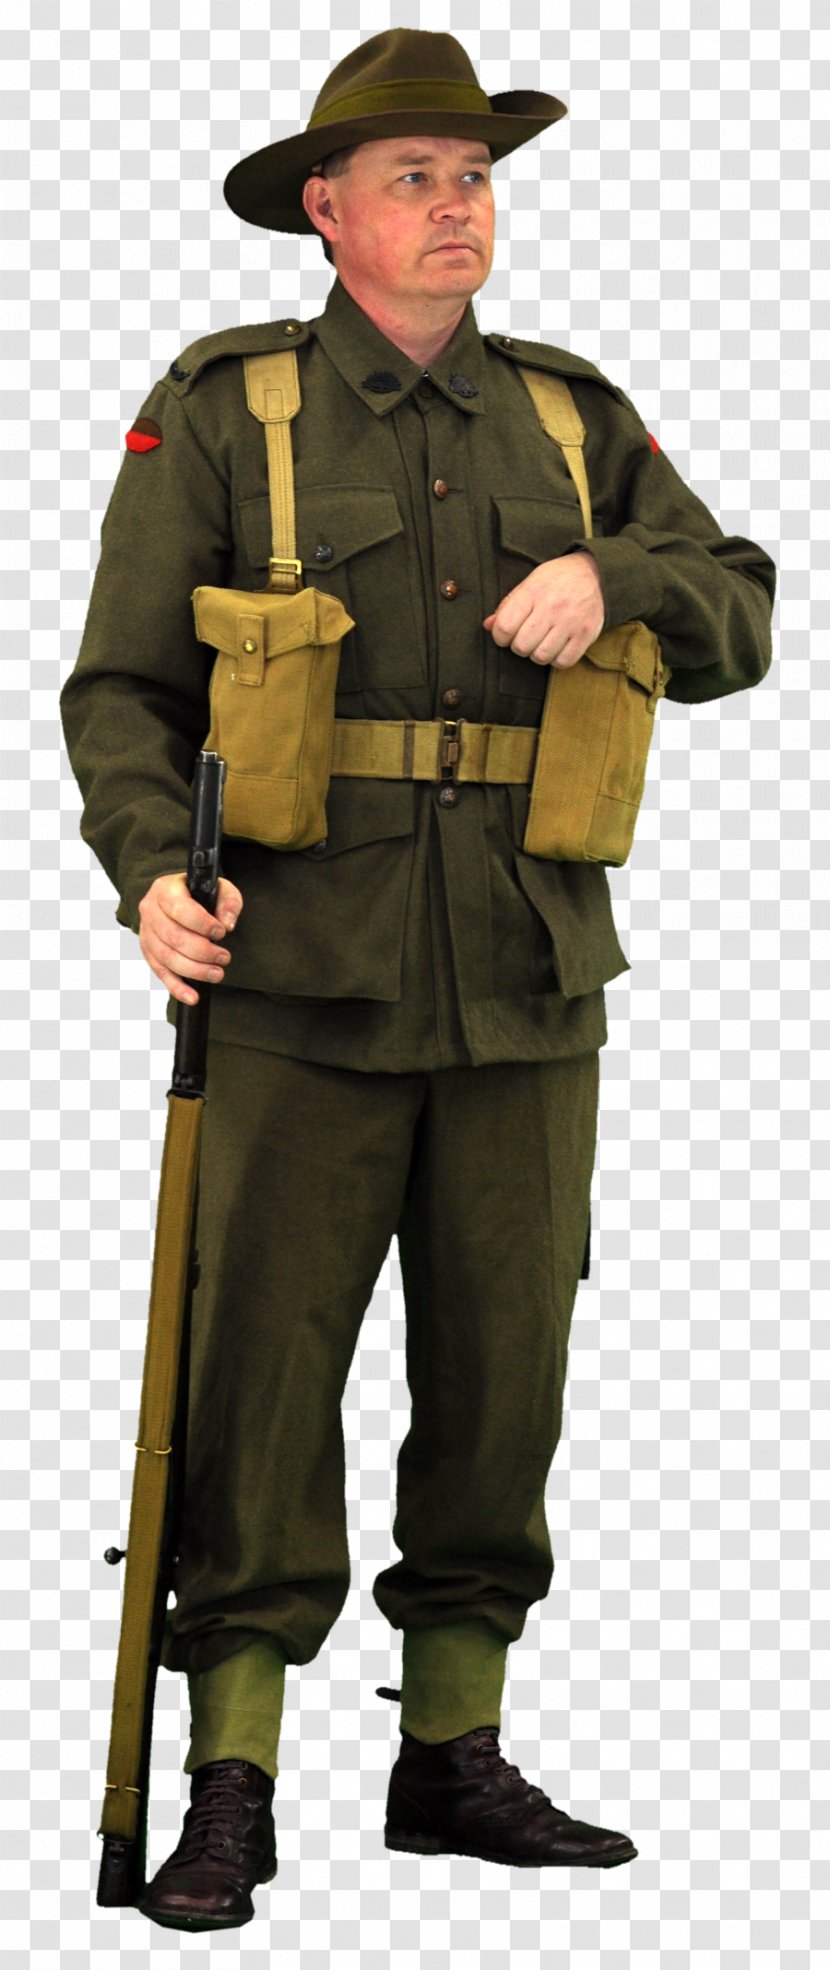 Soldier Second World War Military Uniform Army - Militia - Soldiers Transparent PNG